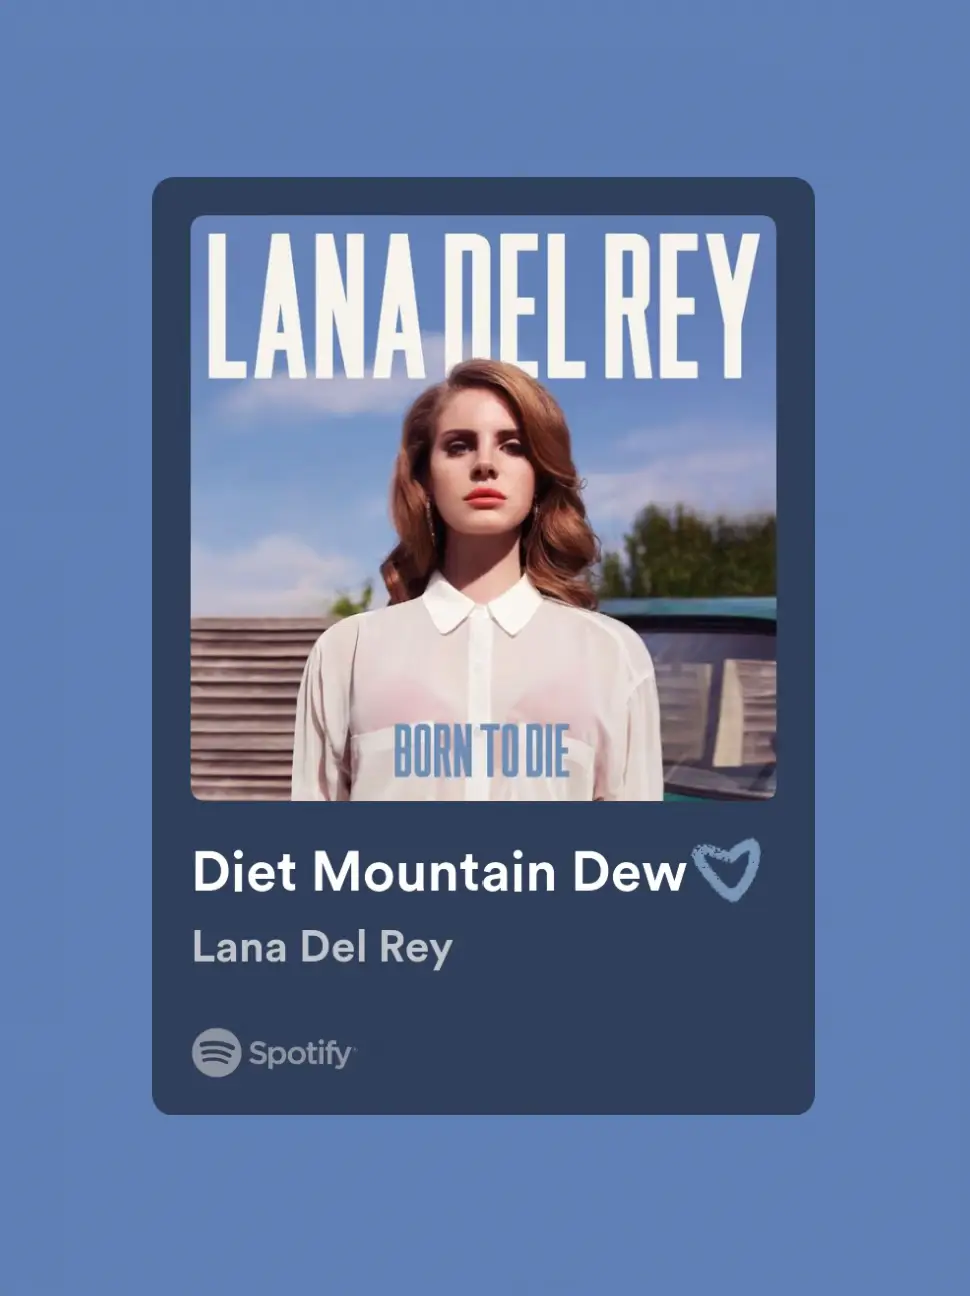  A Spotify ad for Lana Del Rey with a picture of her.